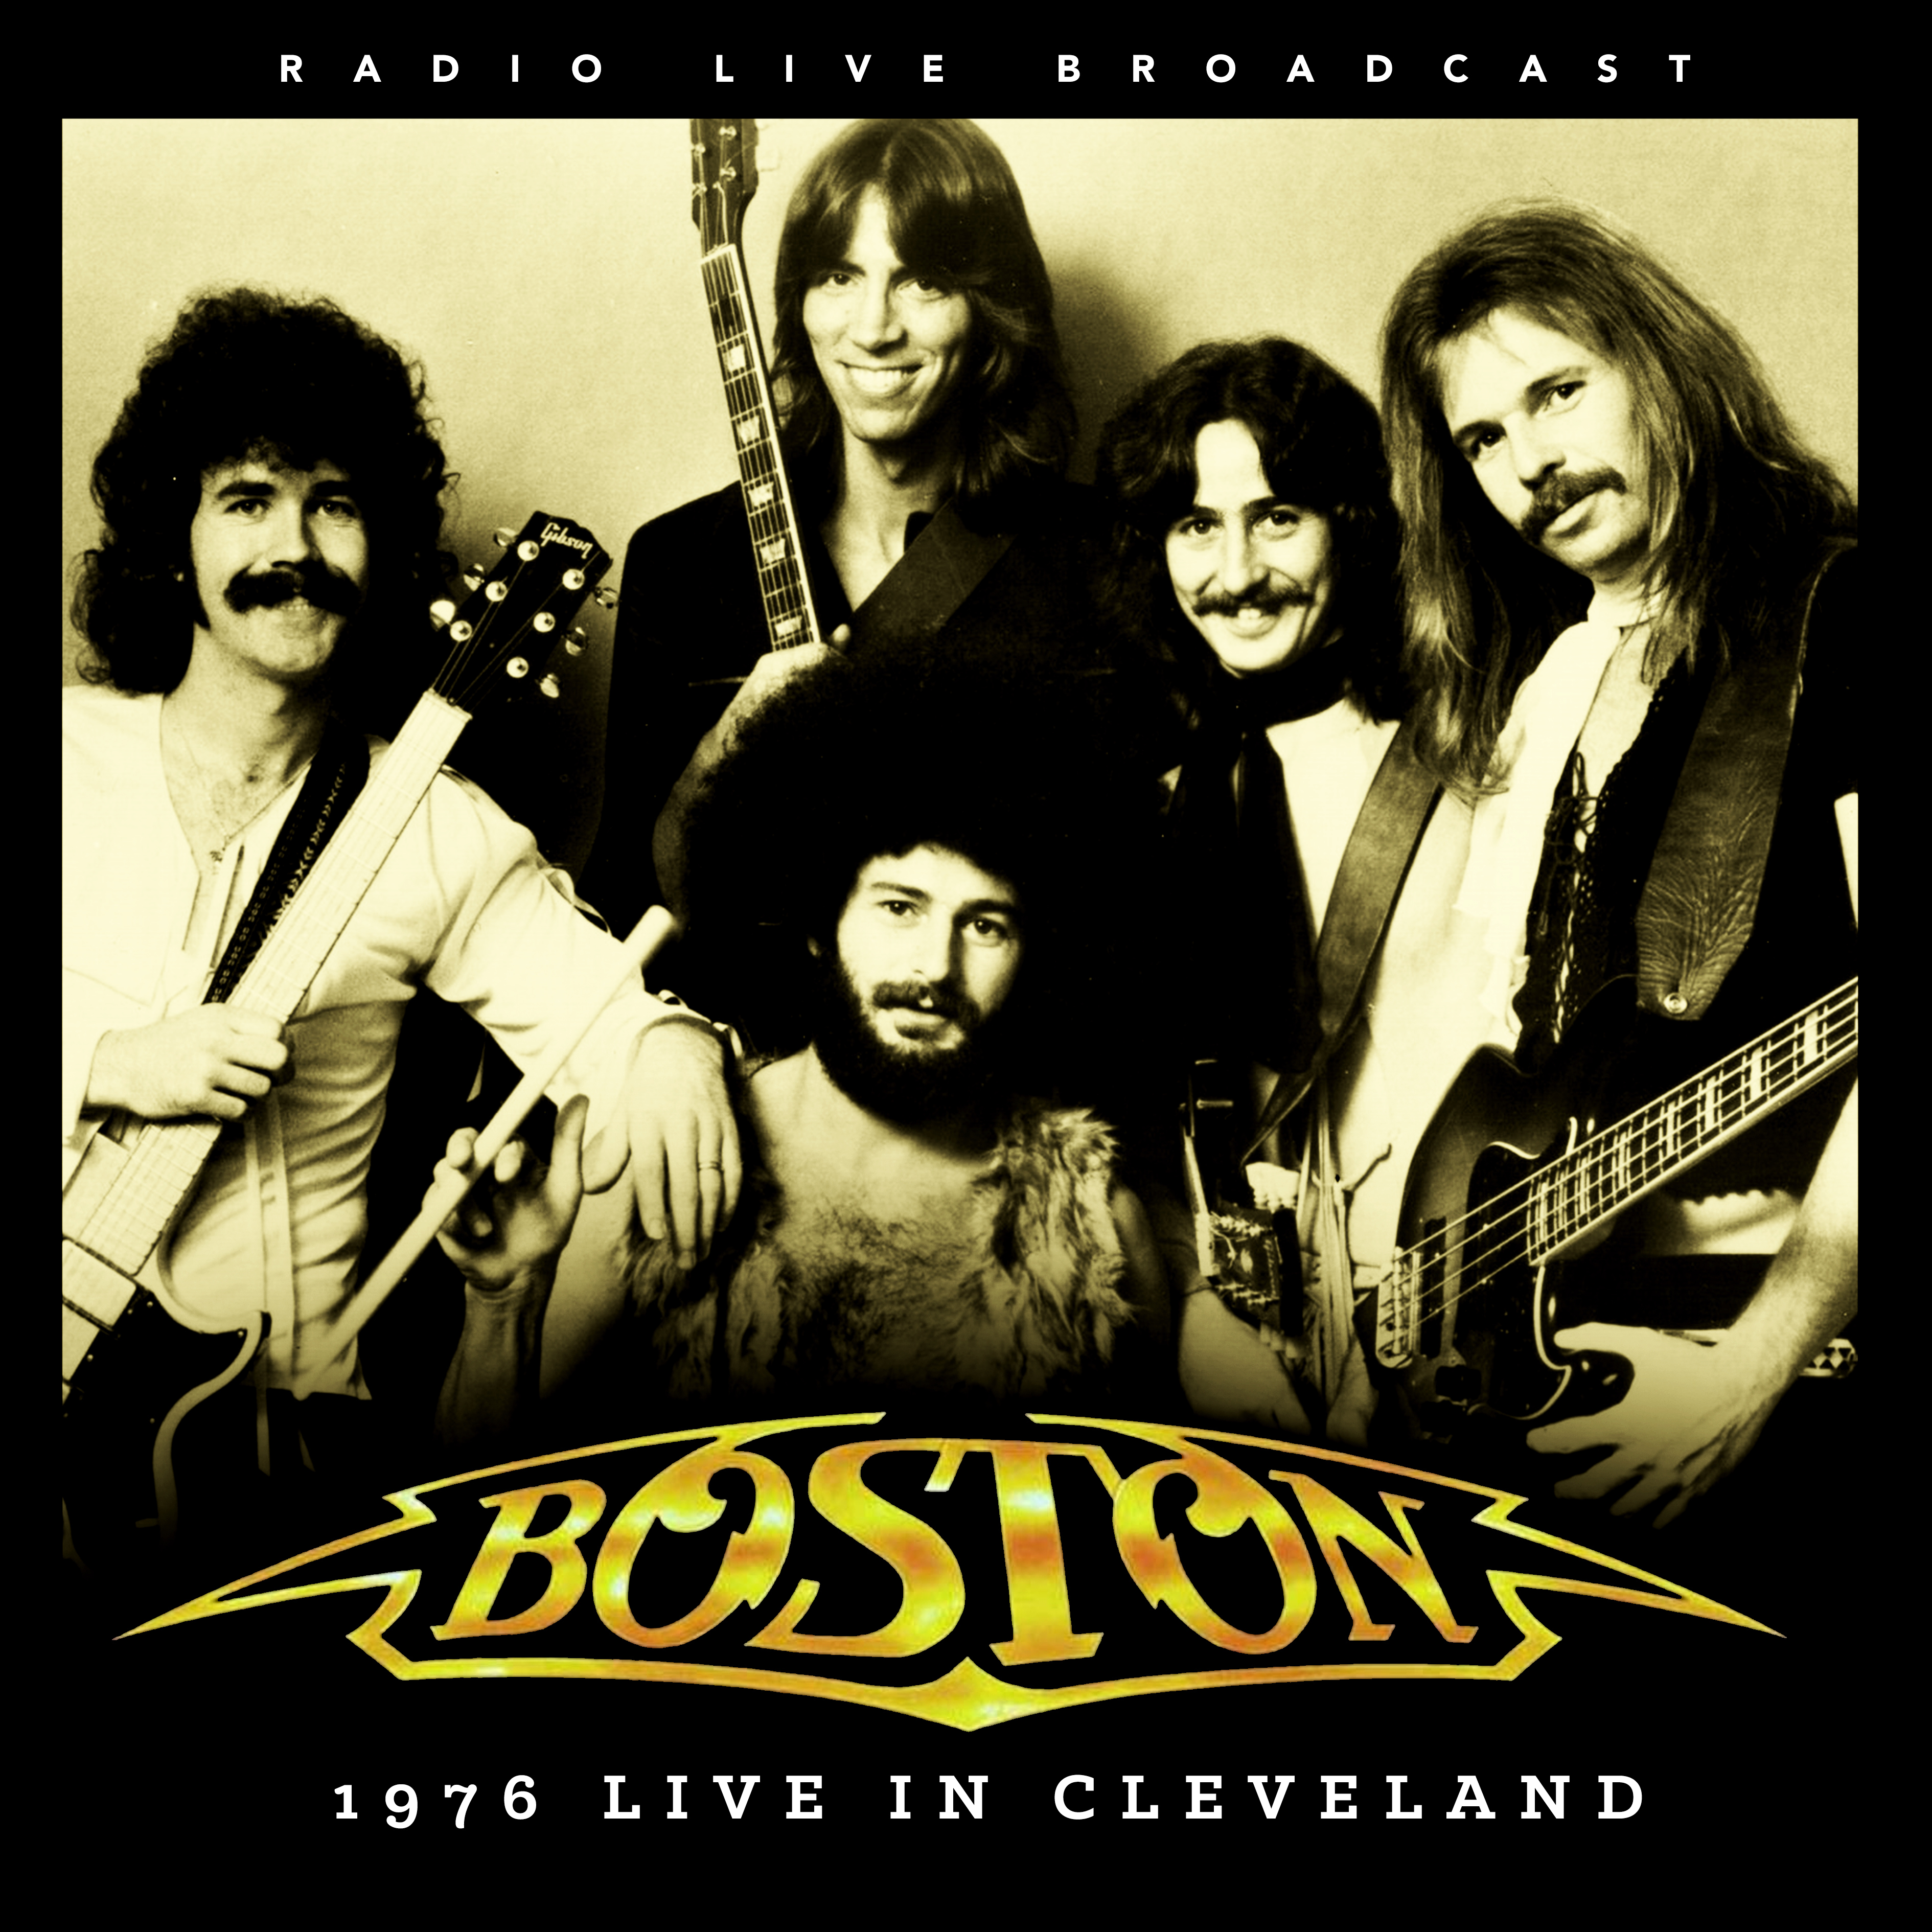 1976 Live in Cleveland